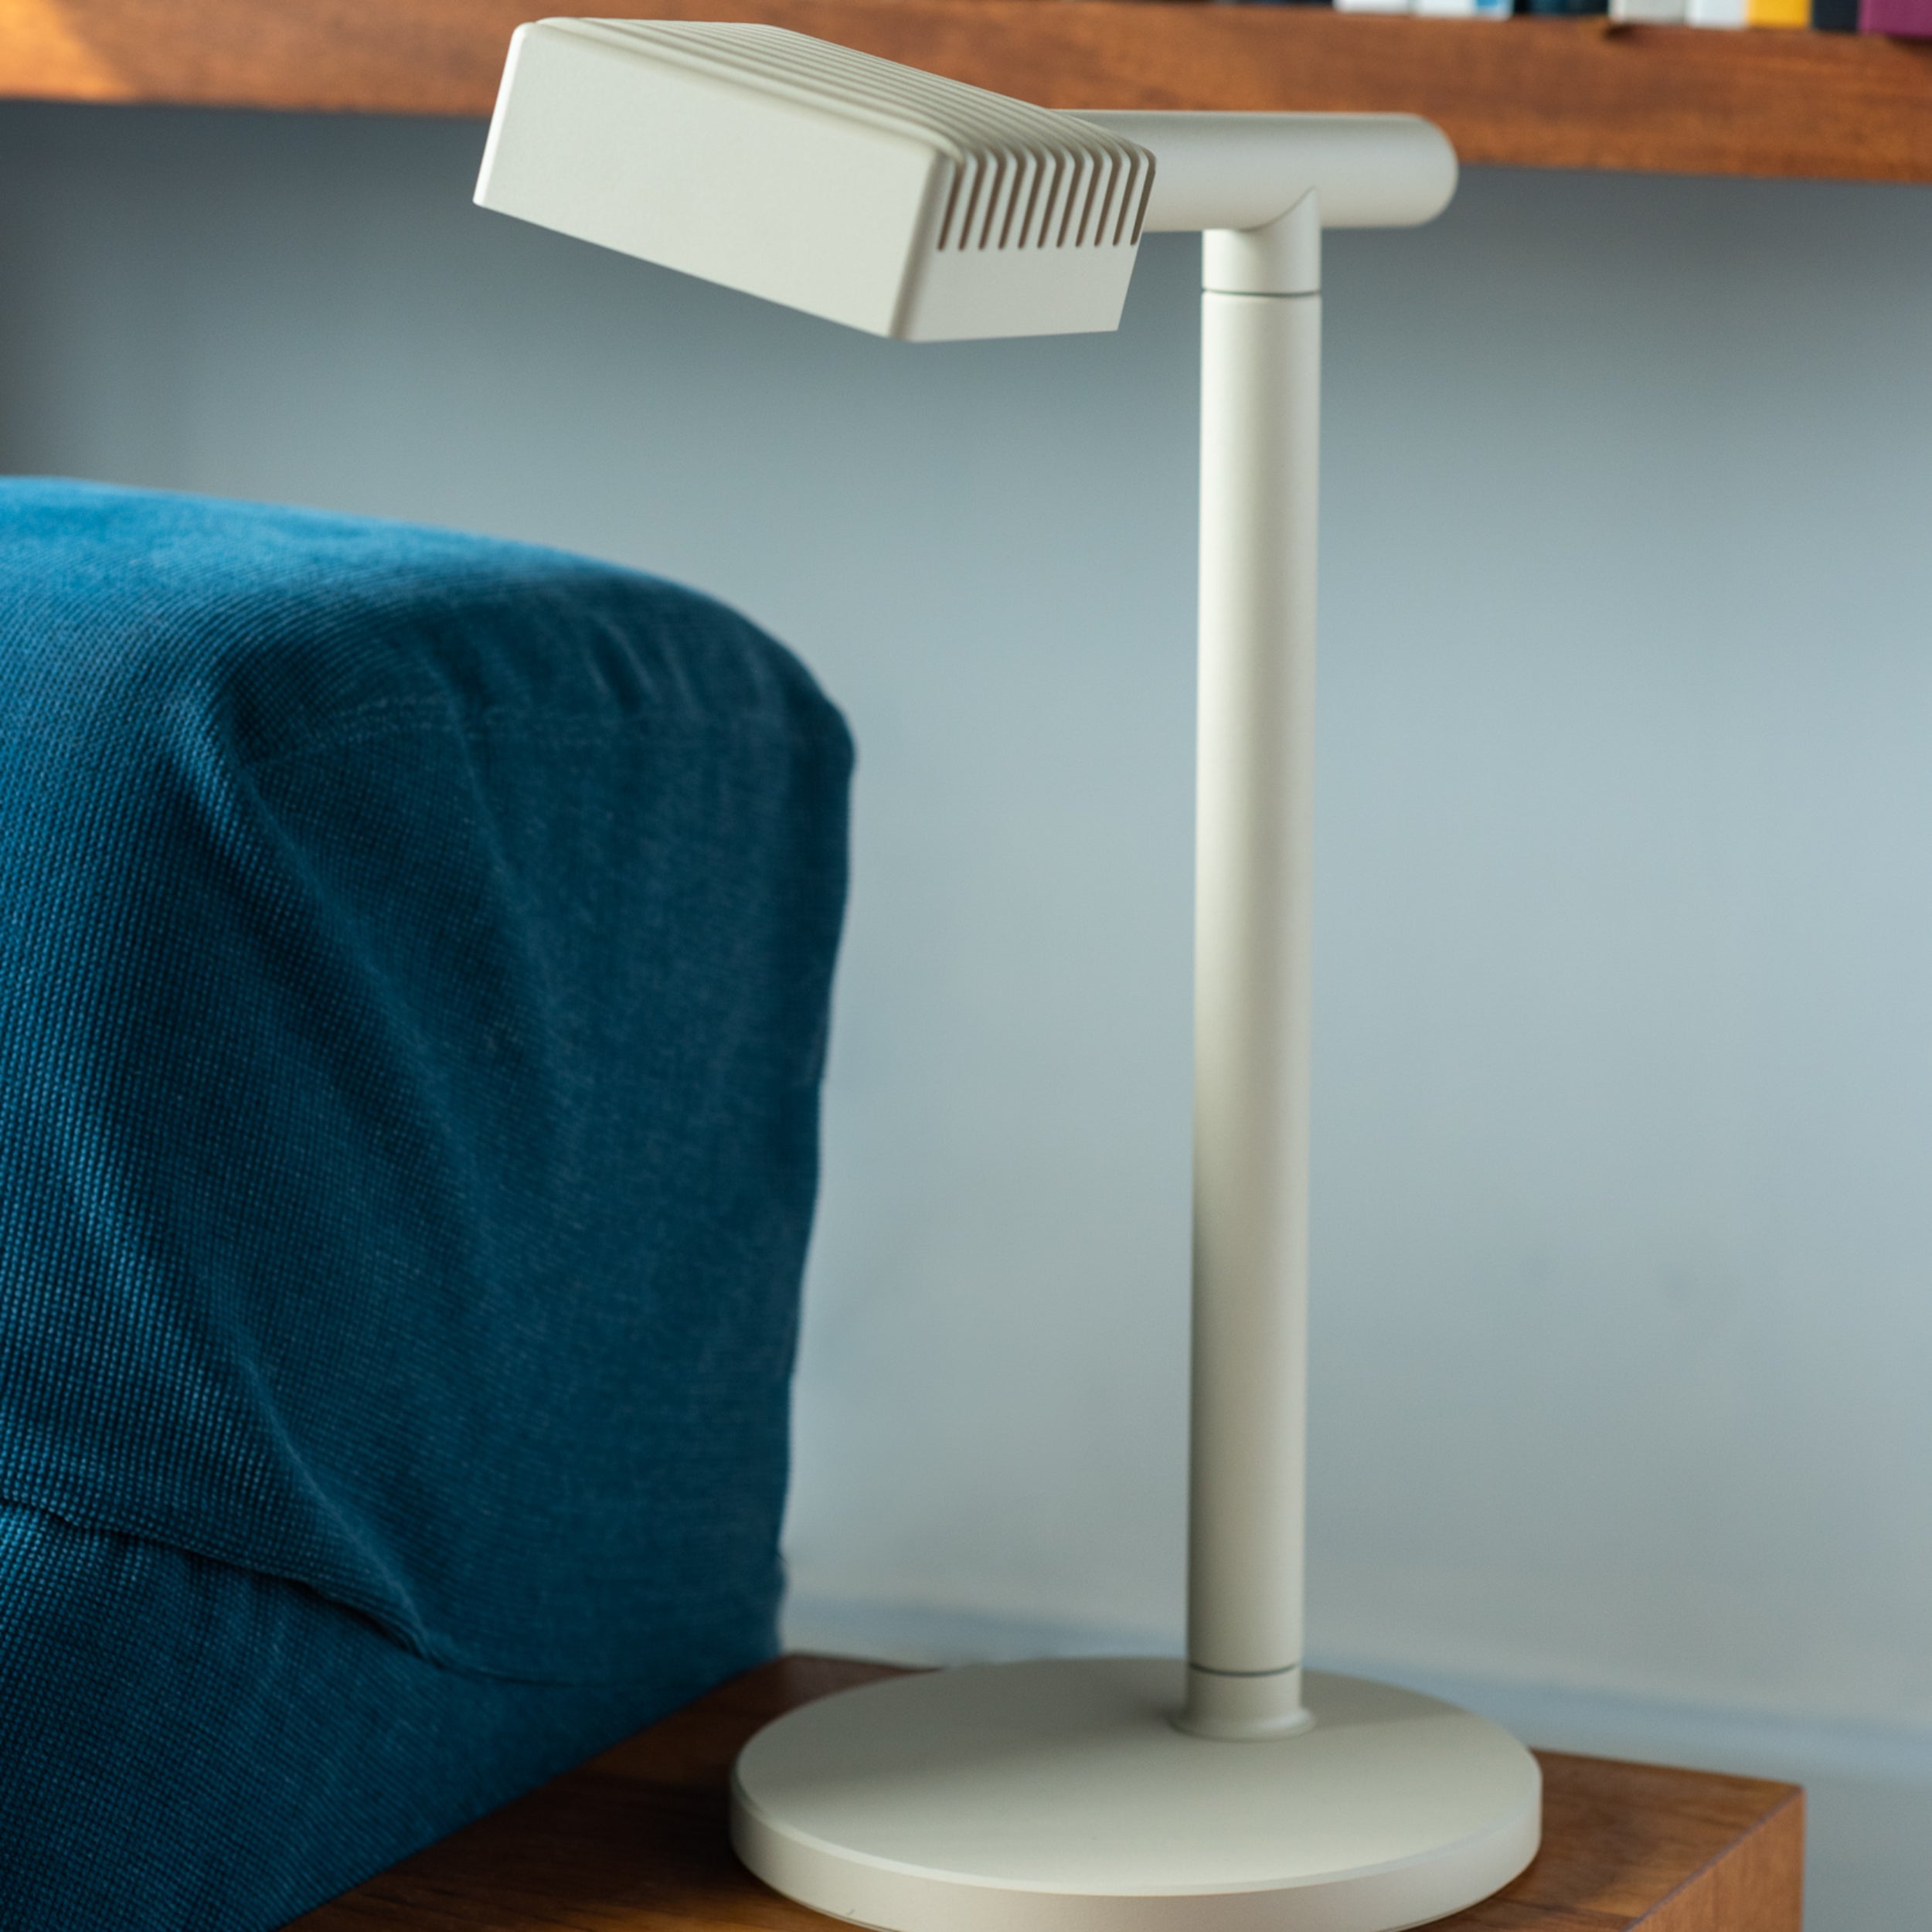 Dorval 02 Table Lamp